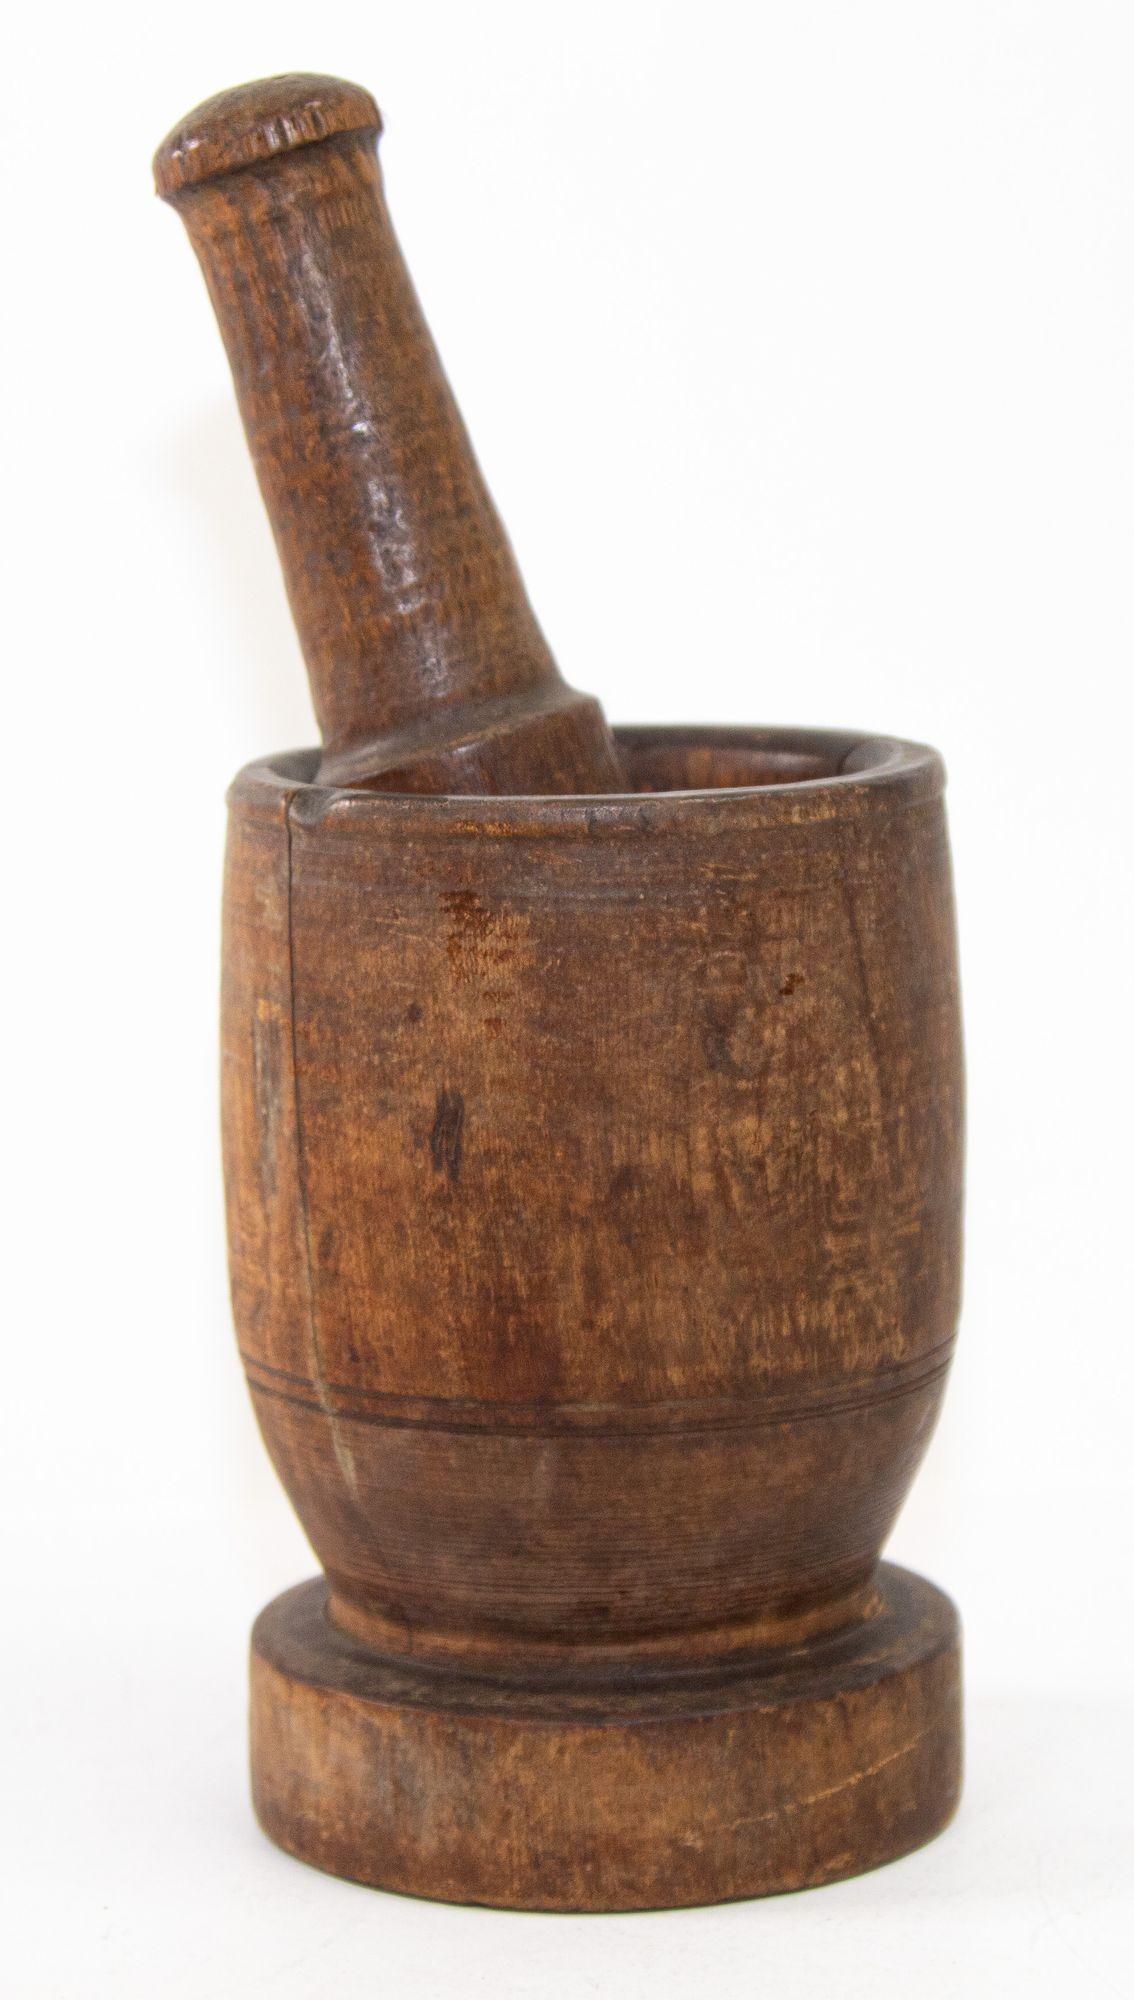 Large wood antique American mortar and pestle.
Early rare turned wood footed mortar and pestle.
American, late 19th century wooden mortar and pestle.
The urn shaped mortar with rich patina has a wonderful warmth and feel.
The base being